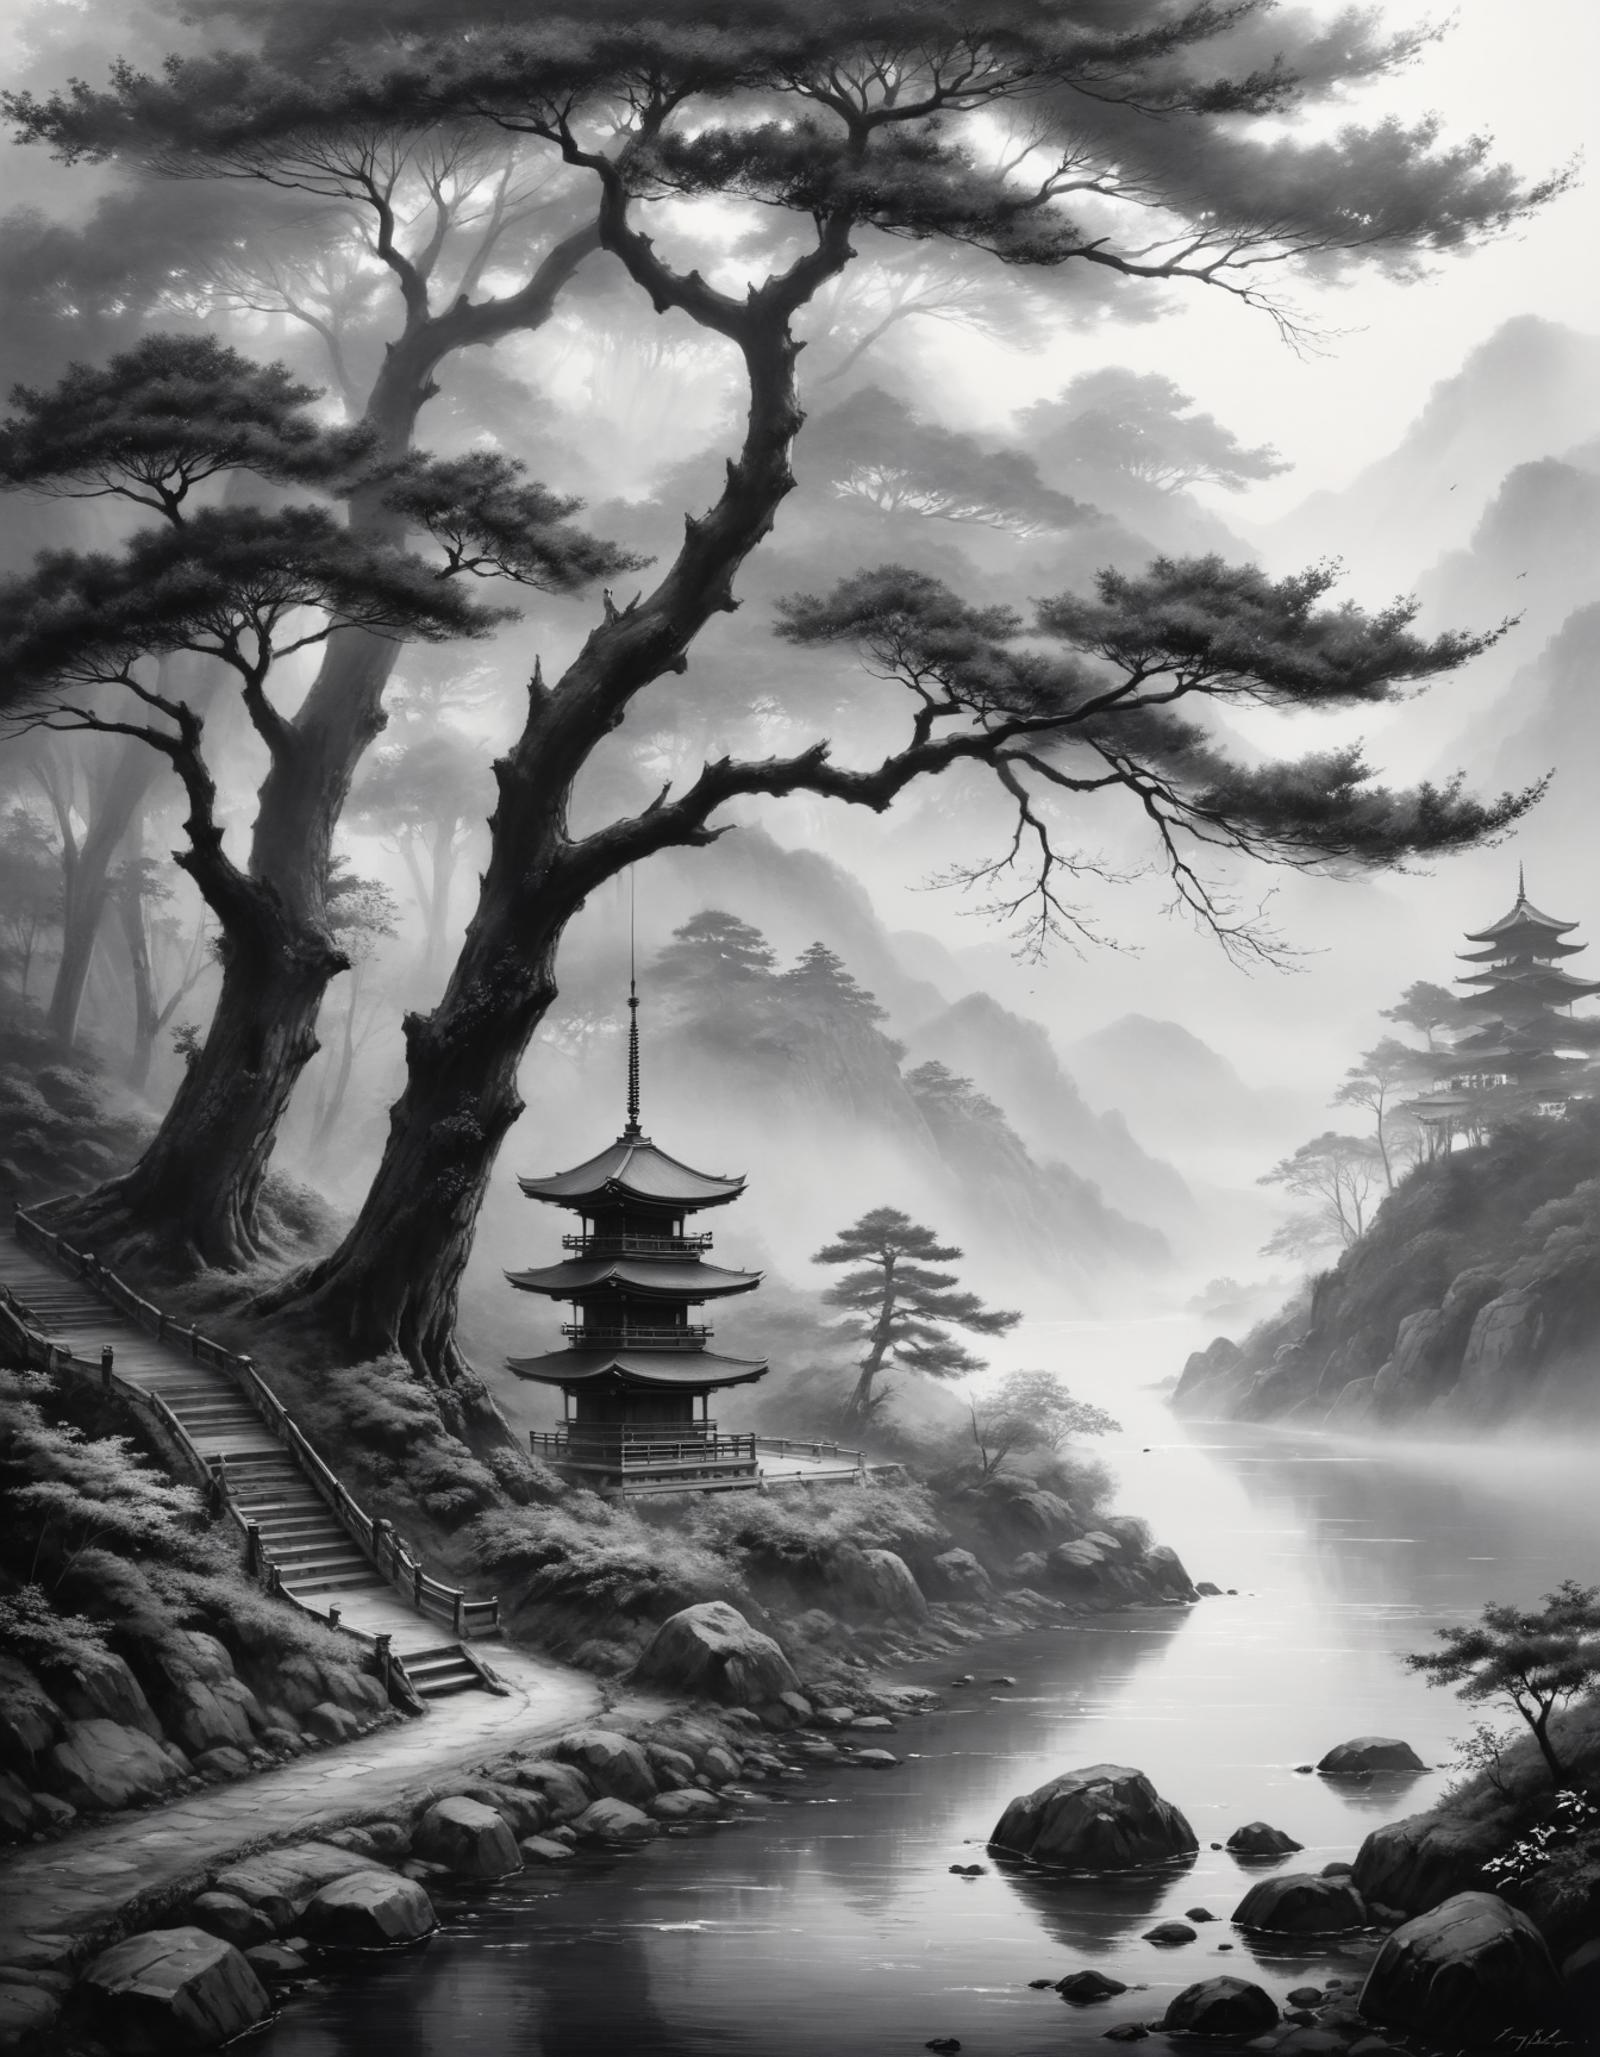 A painting of a temple in the mountains with a bridge leading to it.